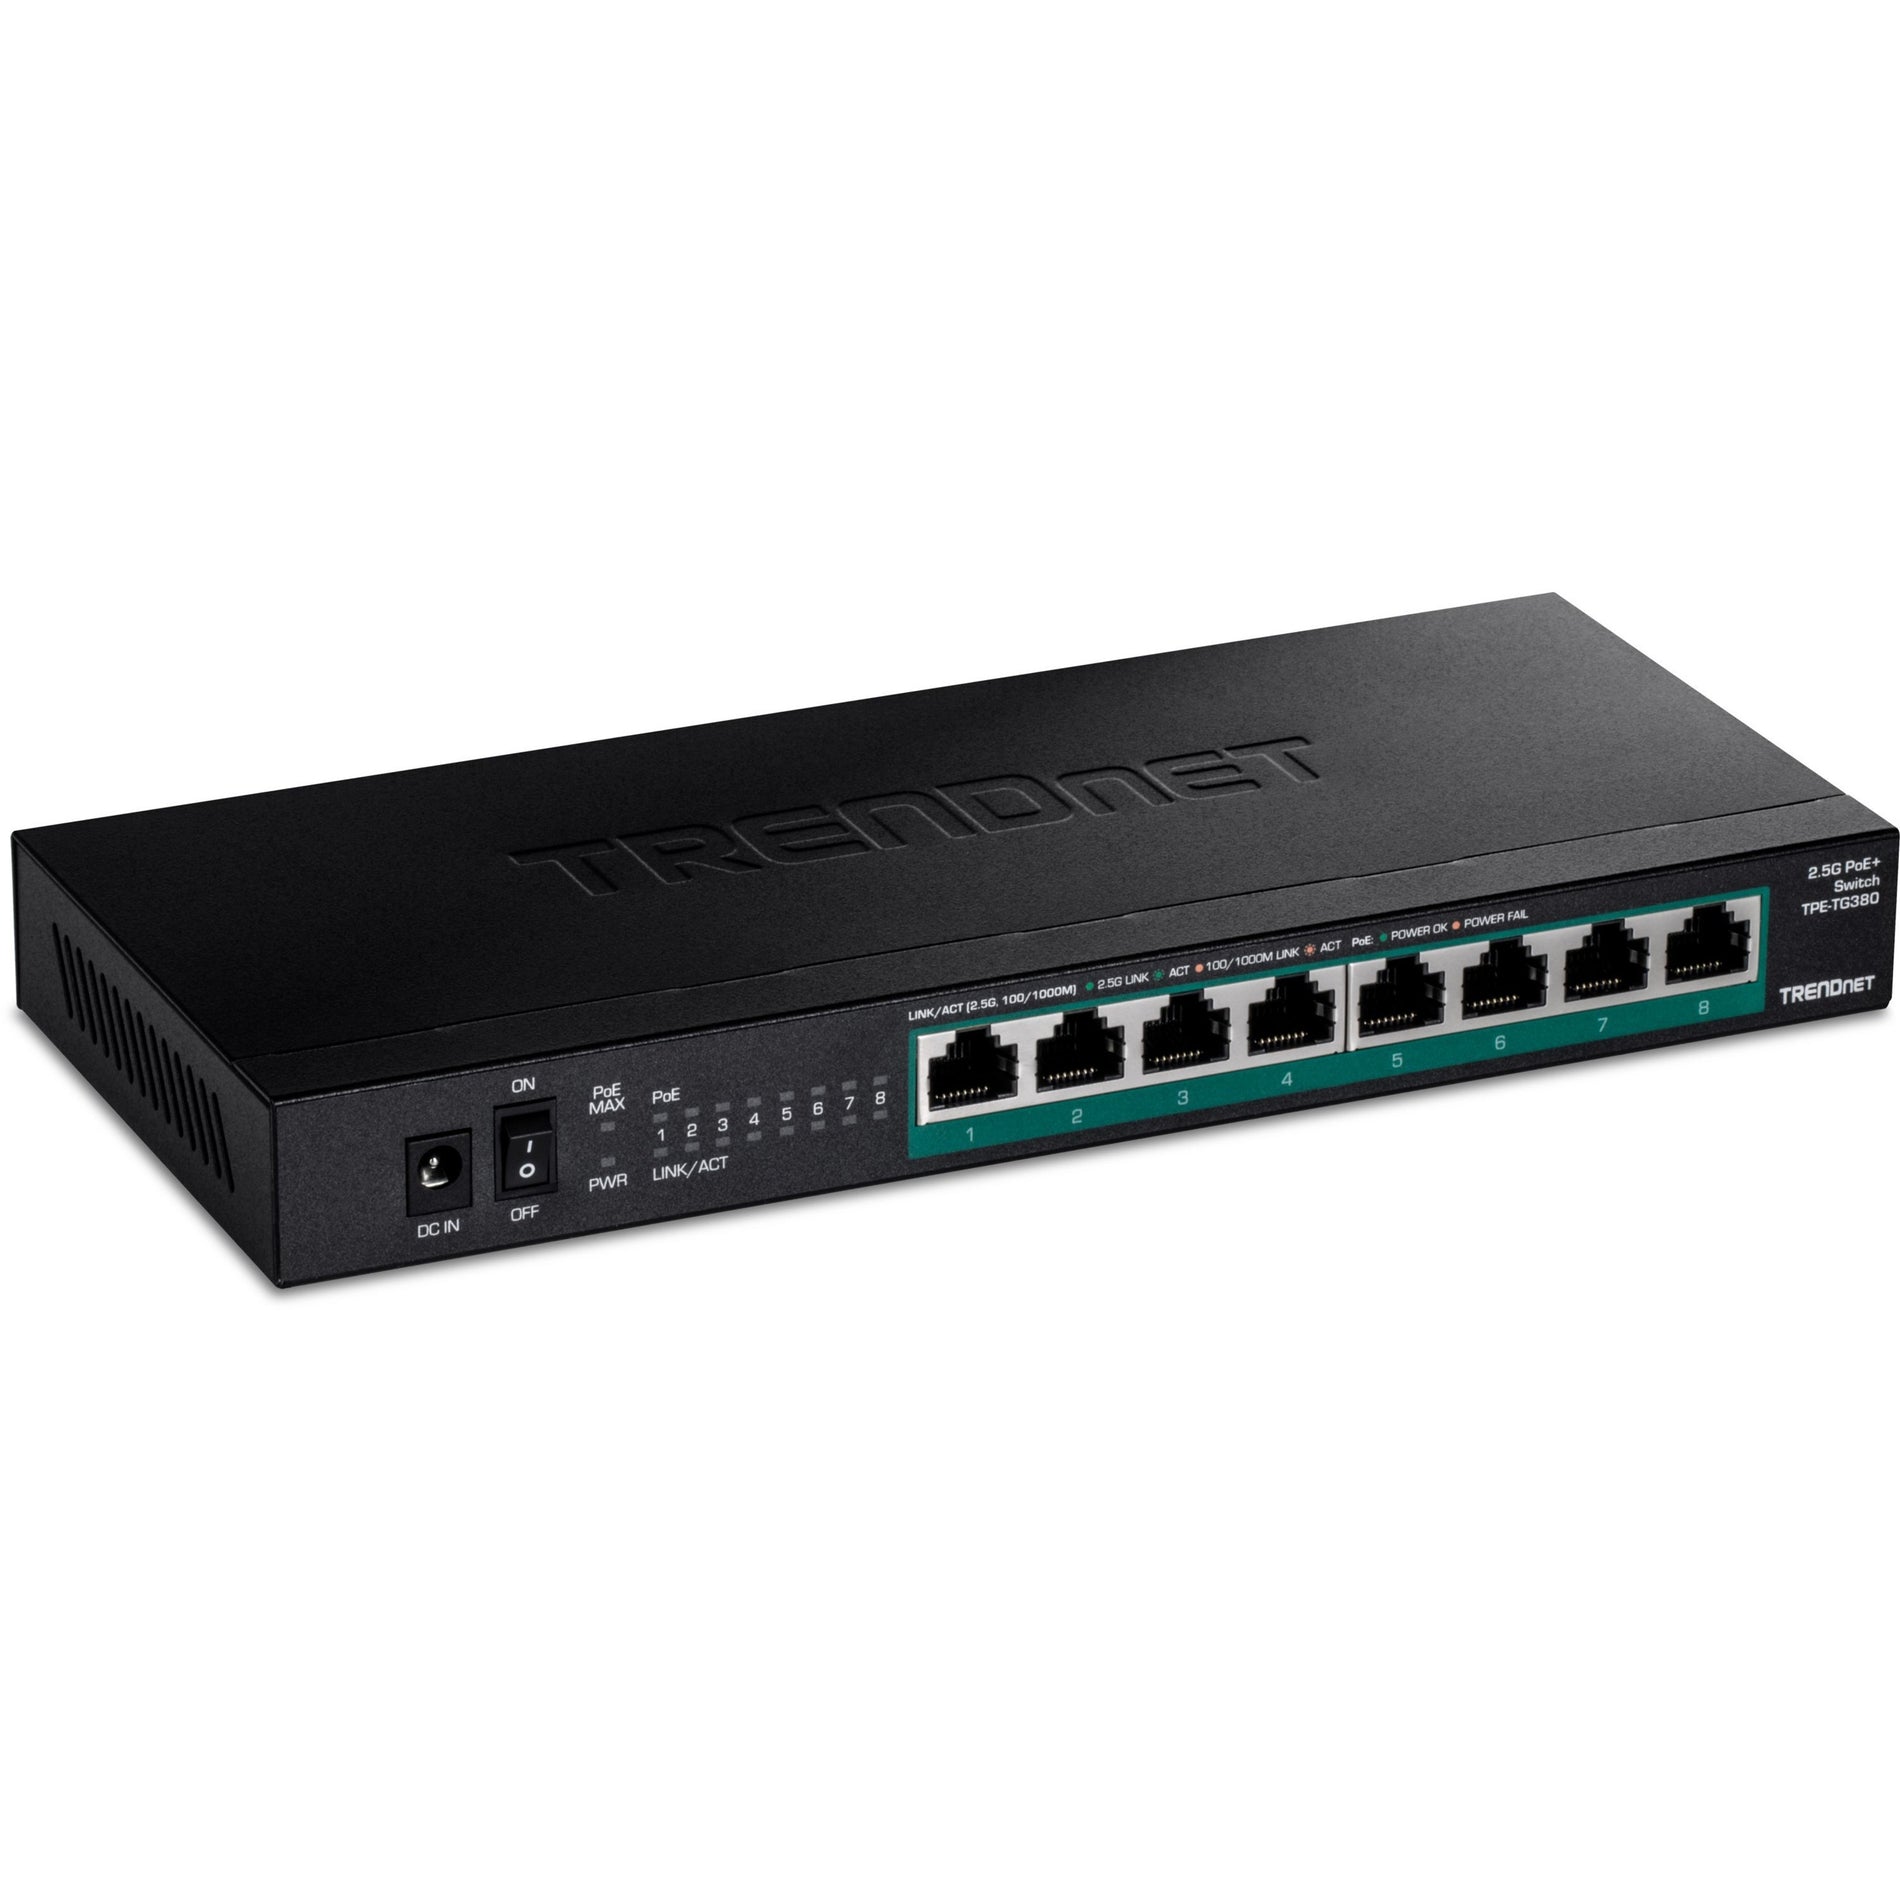 2 ports PoE Extender with water-proof enclosure, using one PoE cable t